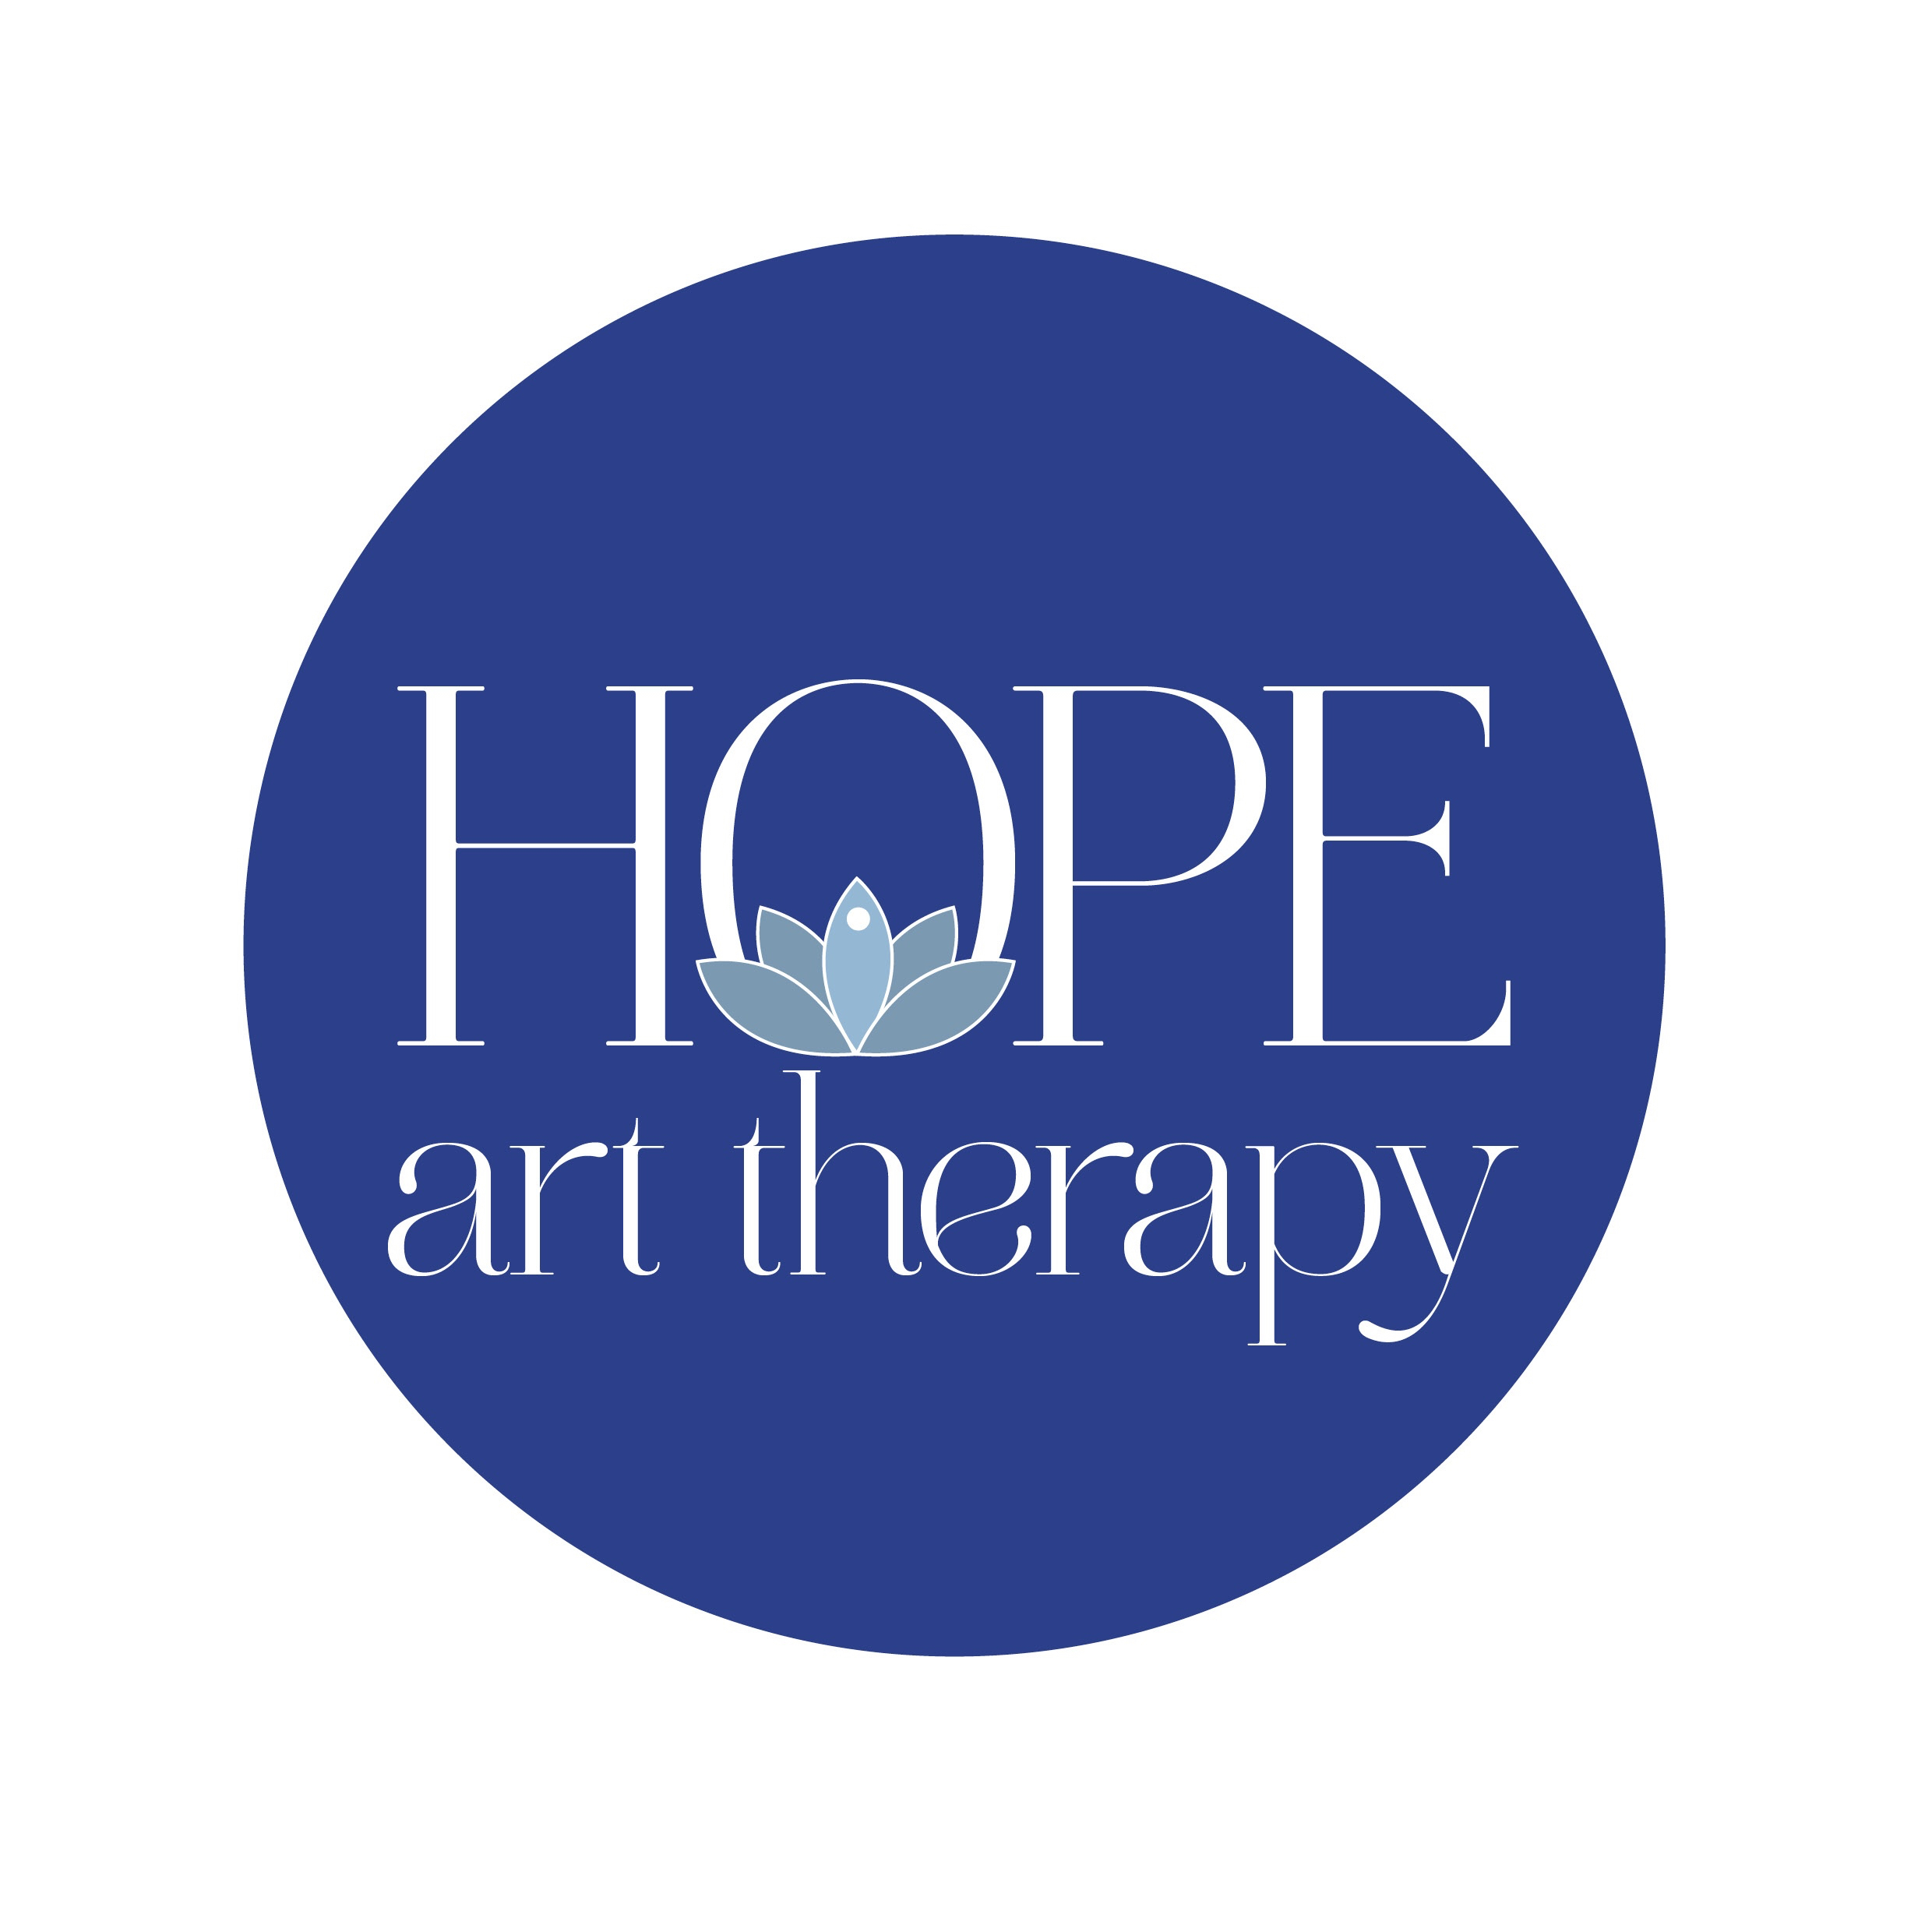 Navy blue circle containing the words Hope Art Therapy and a light blue image of a lotus flower